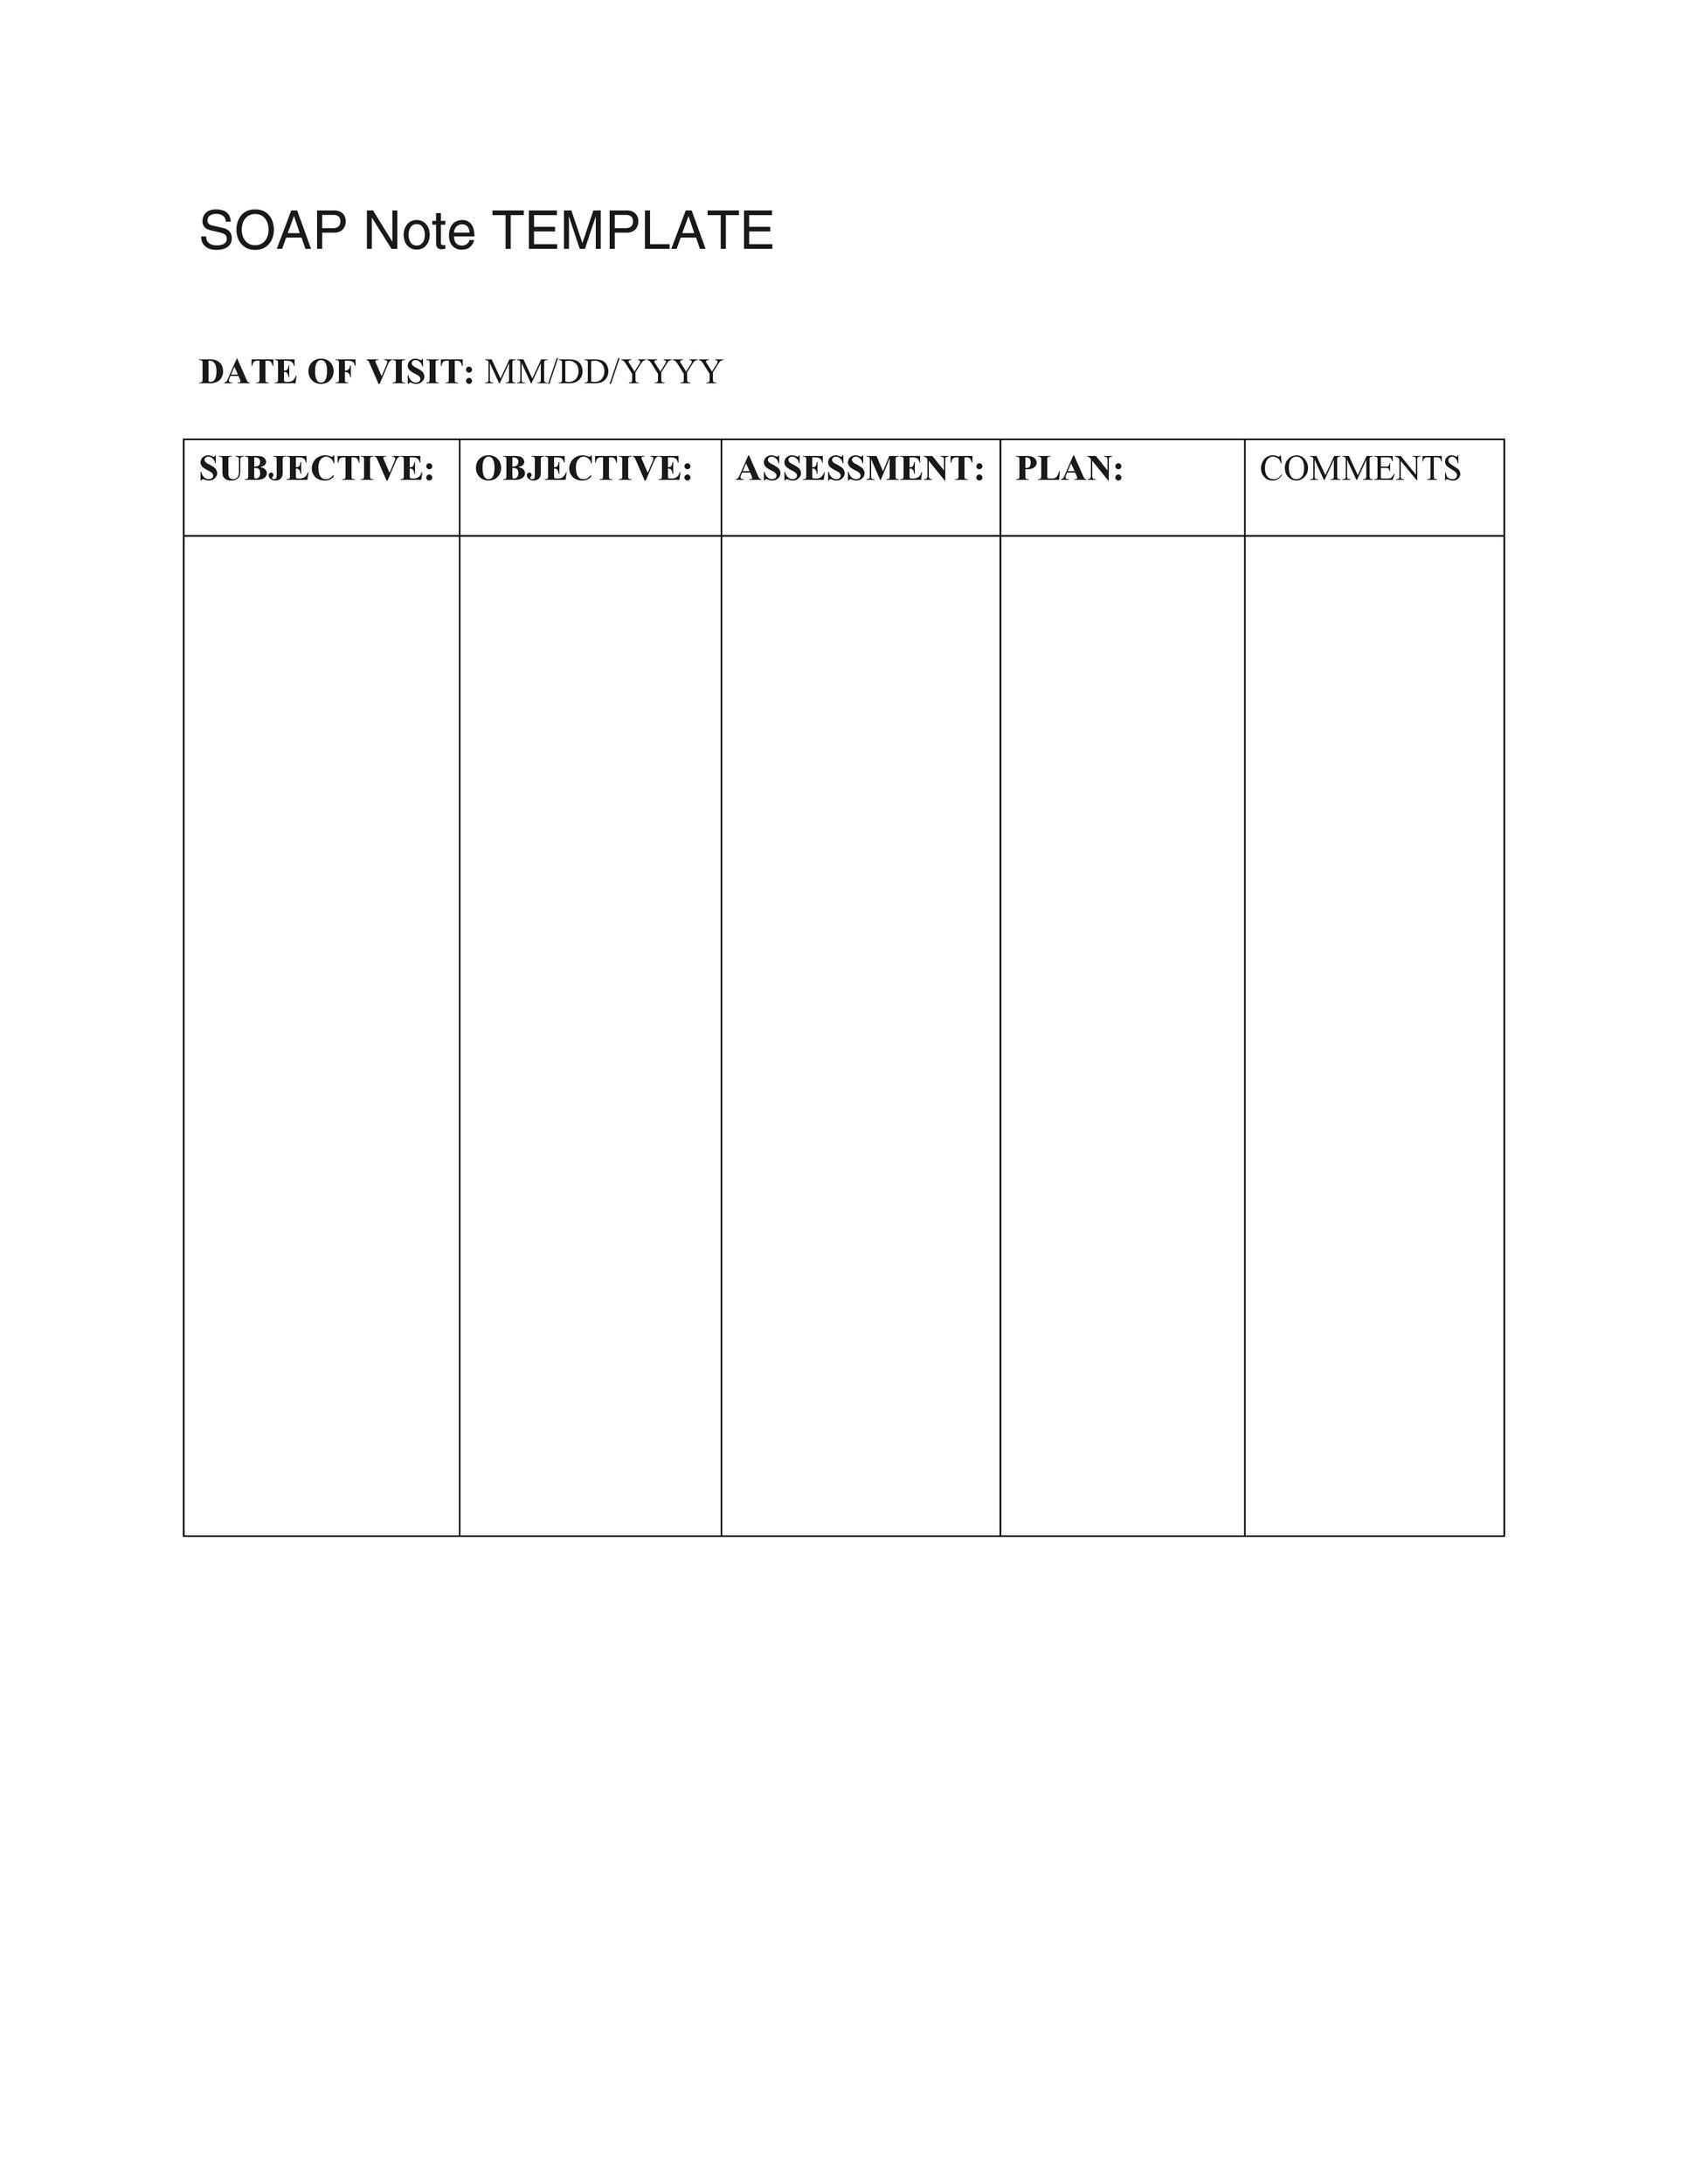 Free Soap Note Template 16